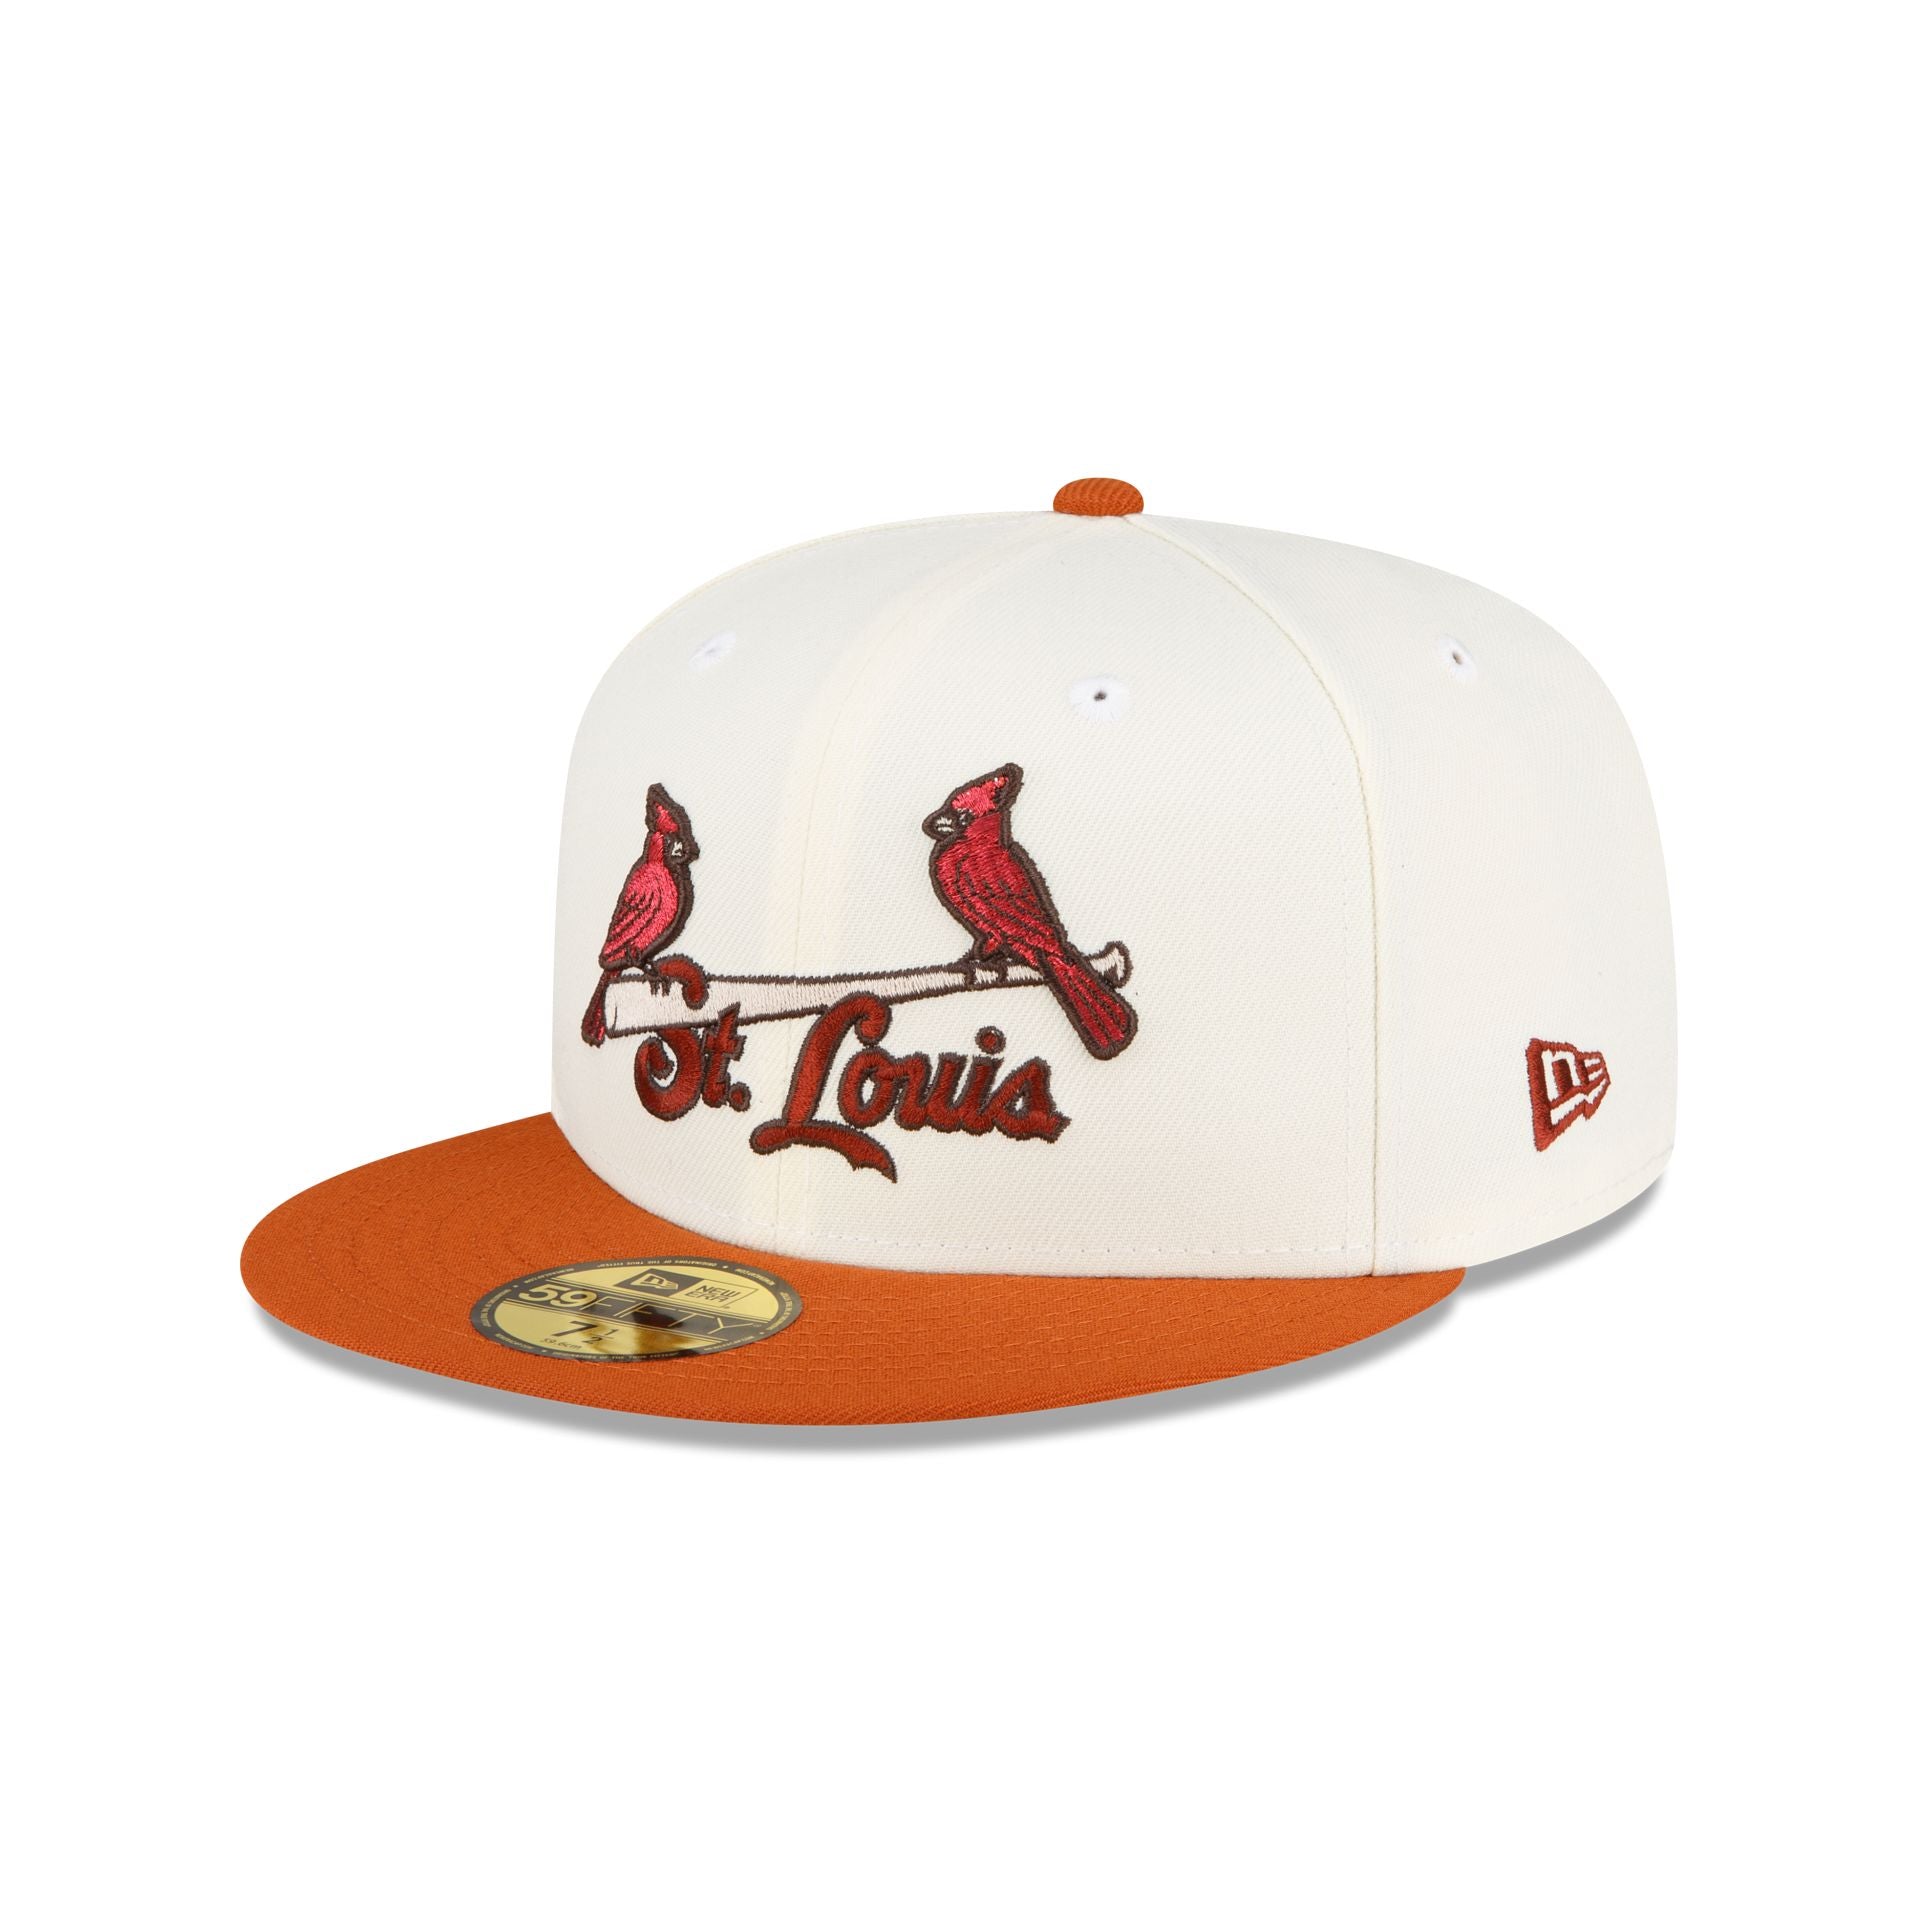 St Louis Cardinals Hat Baseball Cap Fitted 7 3/8 New Era All White